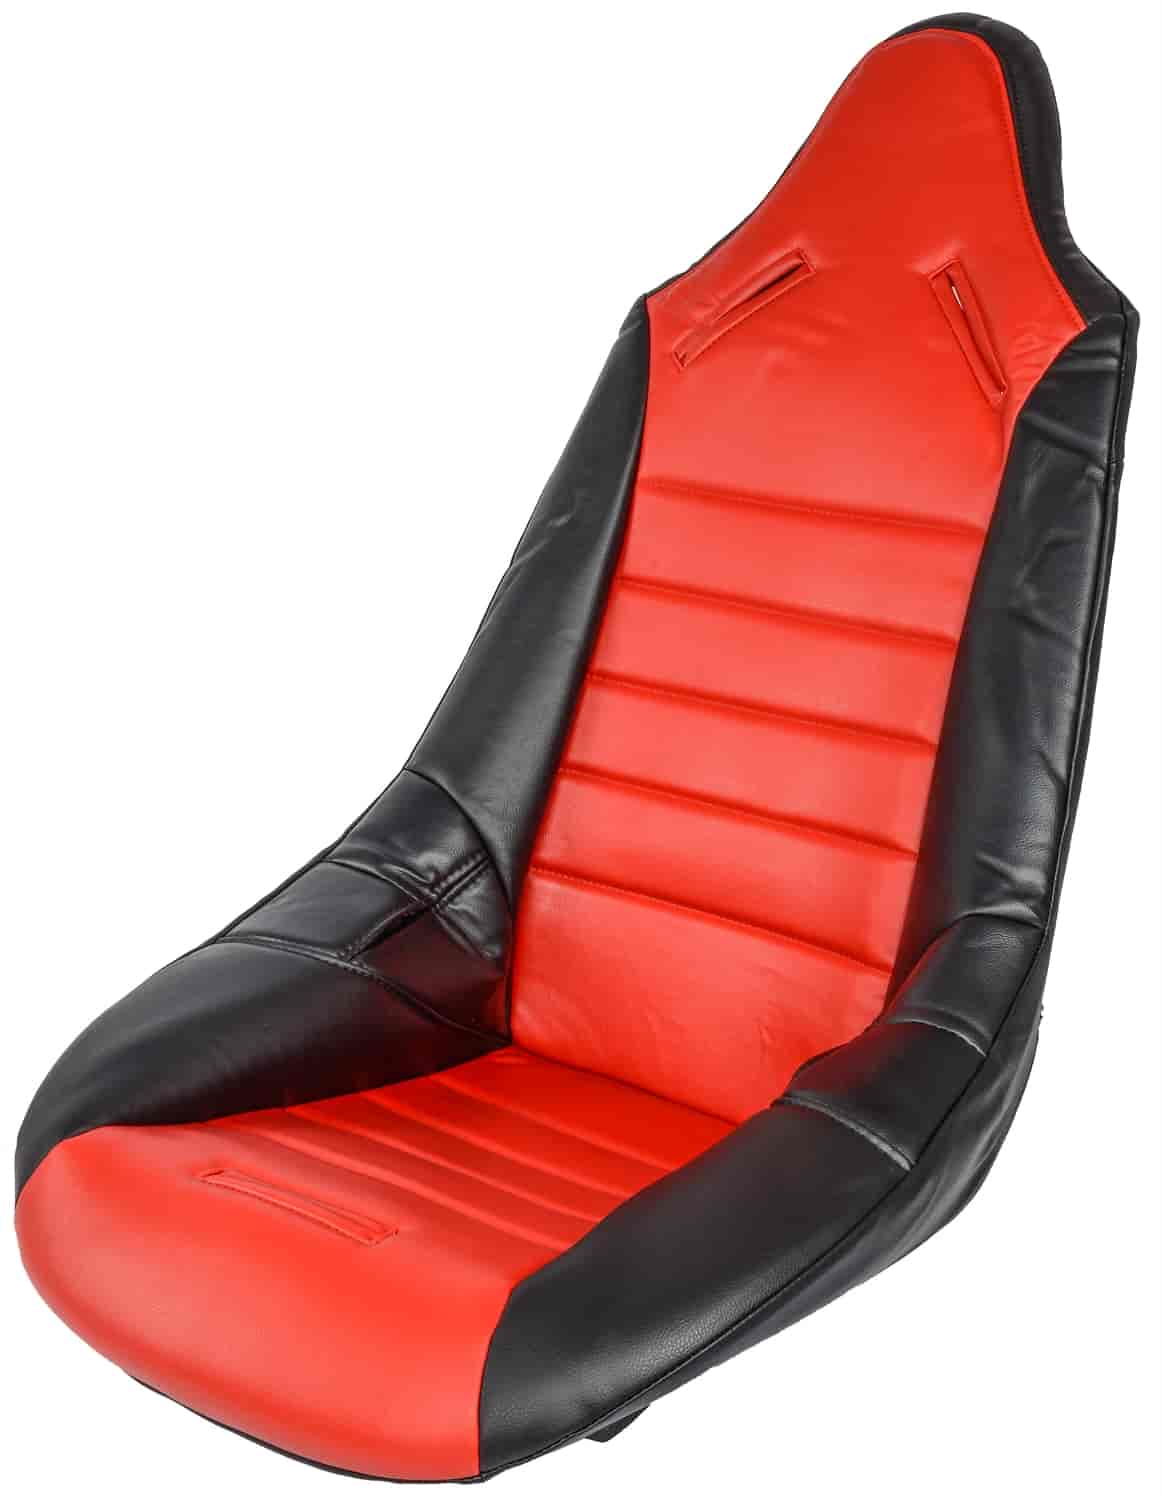 Pro High Back II Vinyl Seat Cover Red